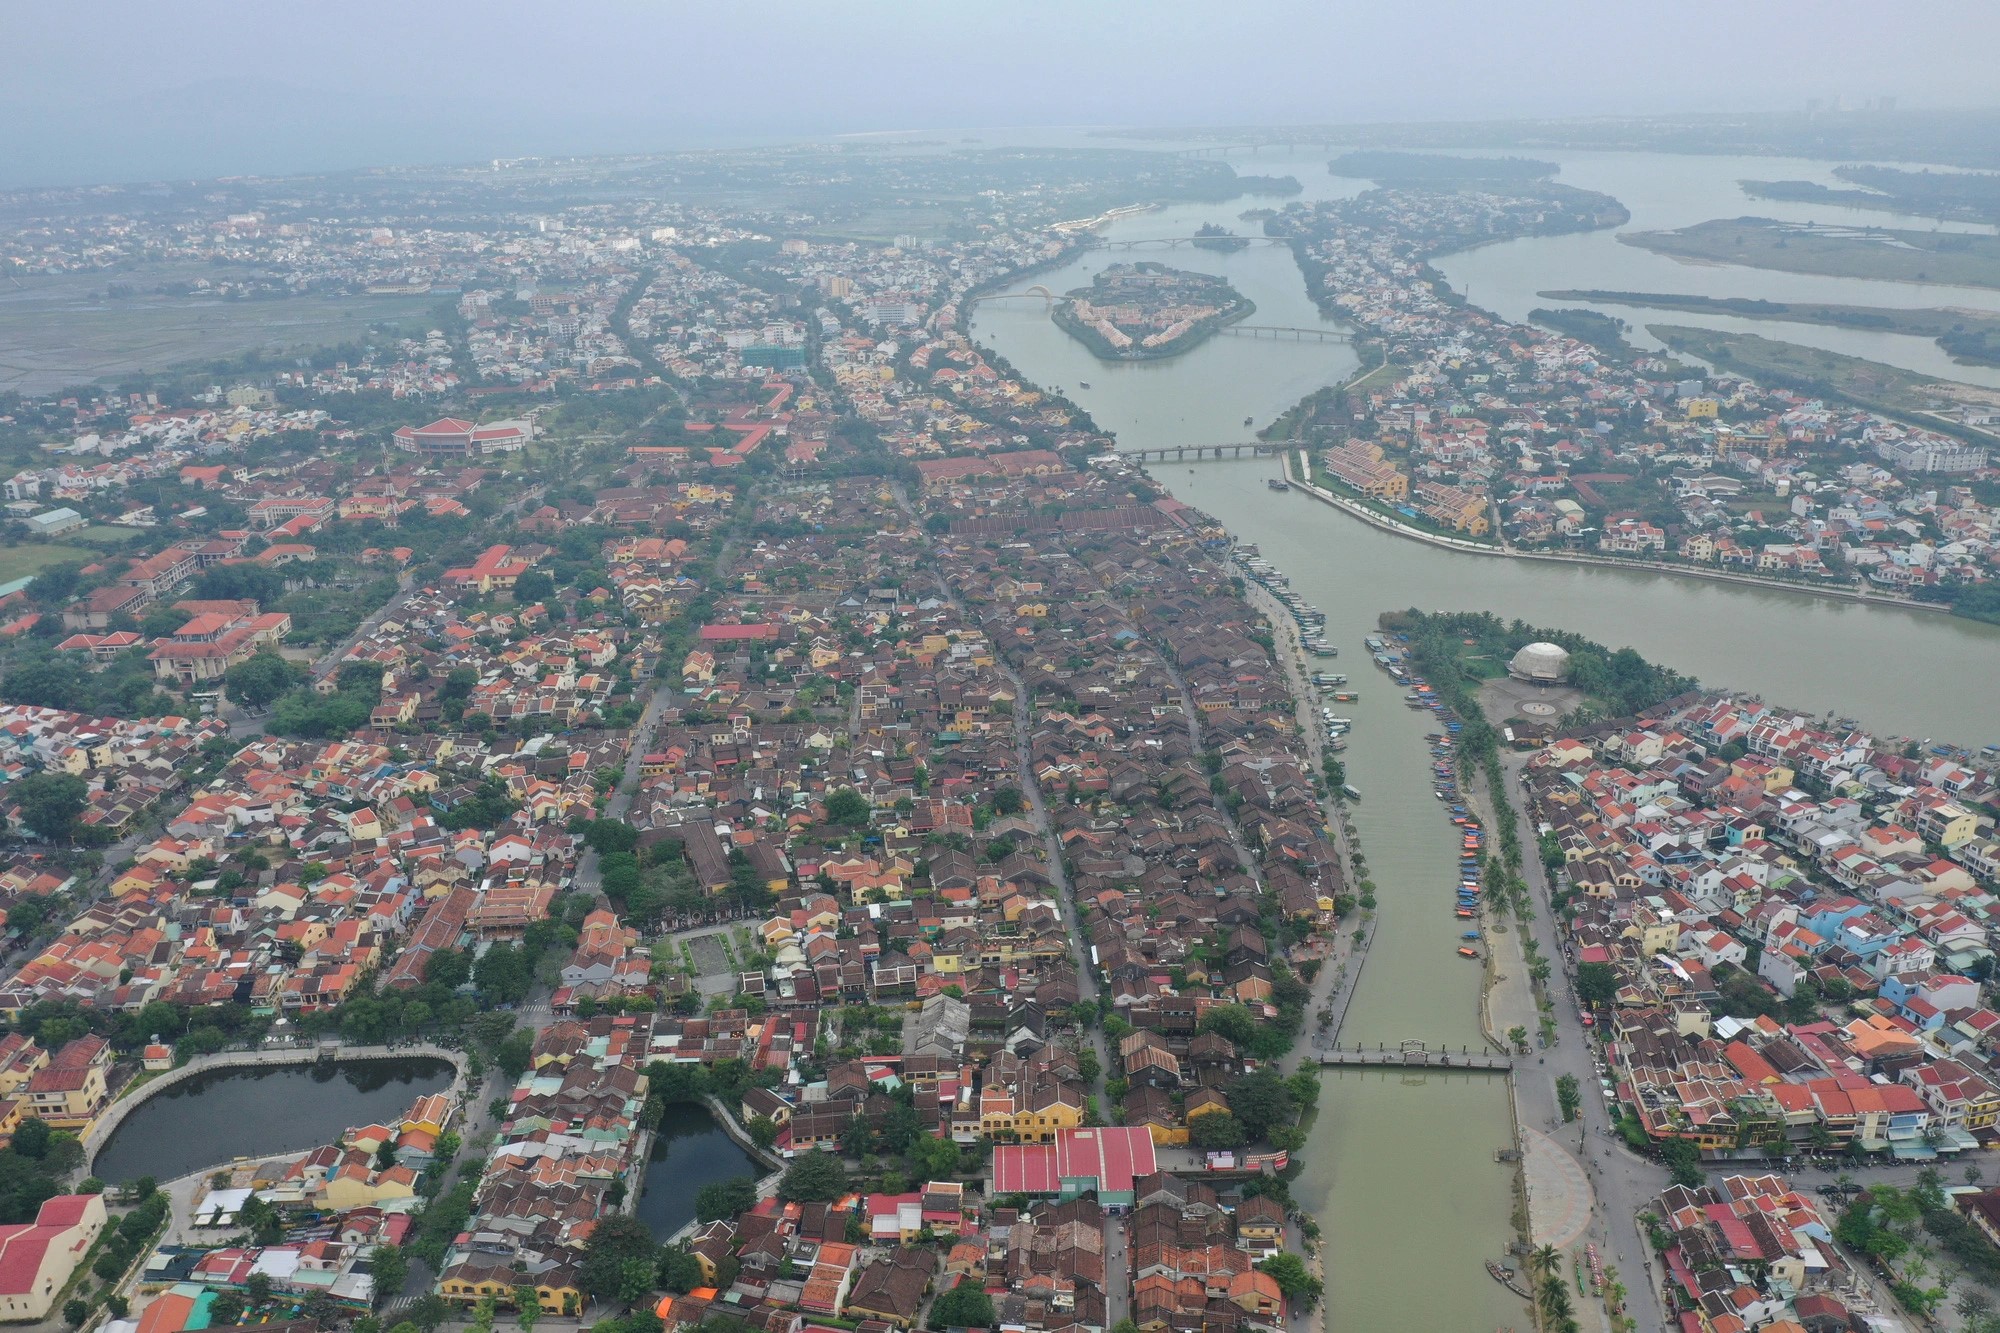 Hoi An photograph of a city from above. Photo: B.D. / Tuoi Tre